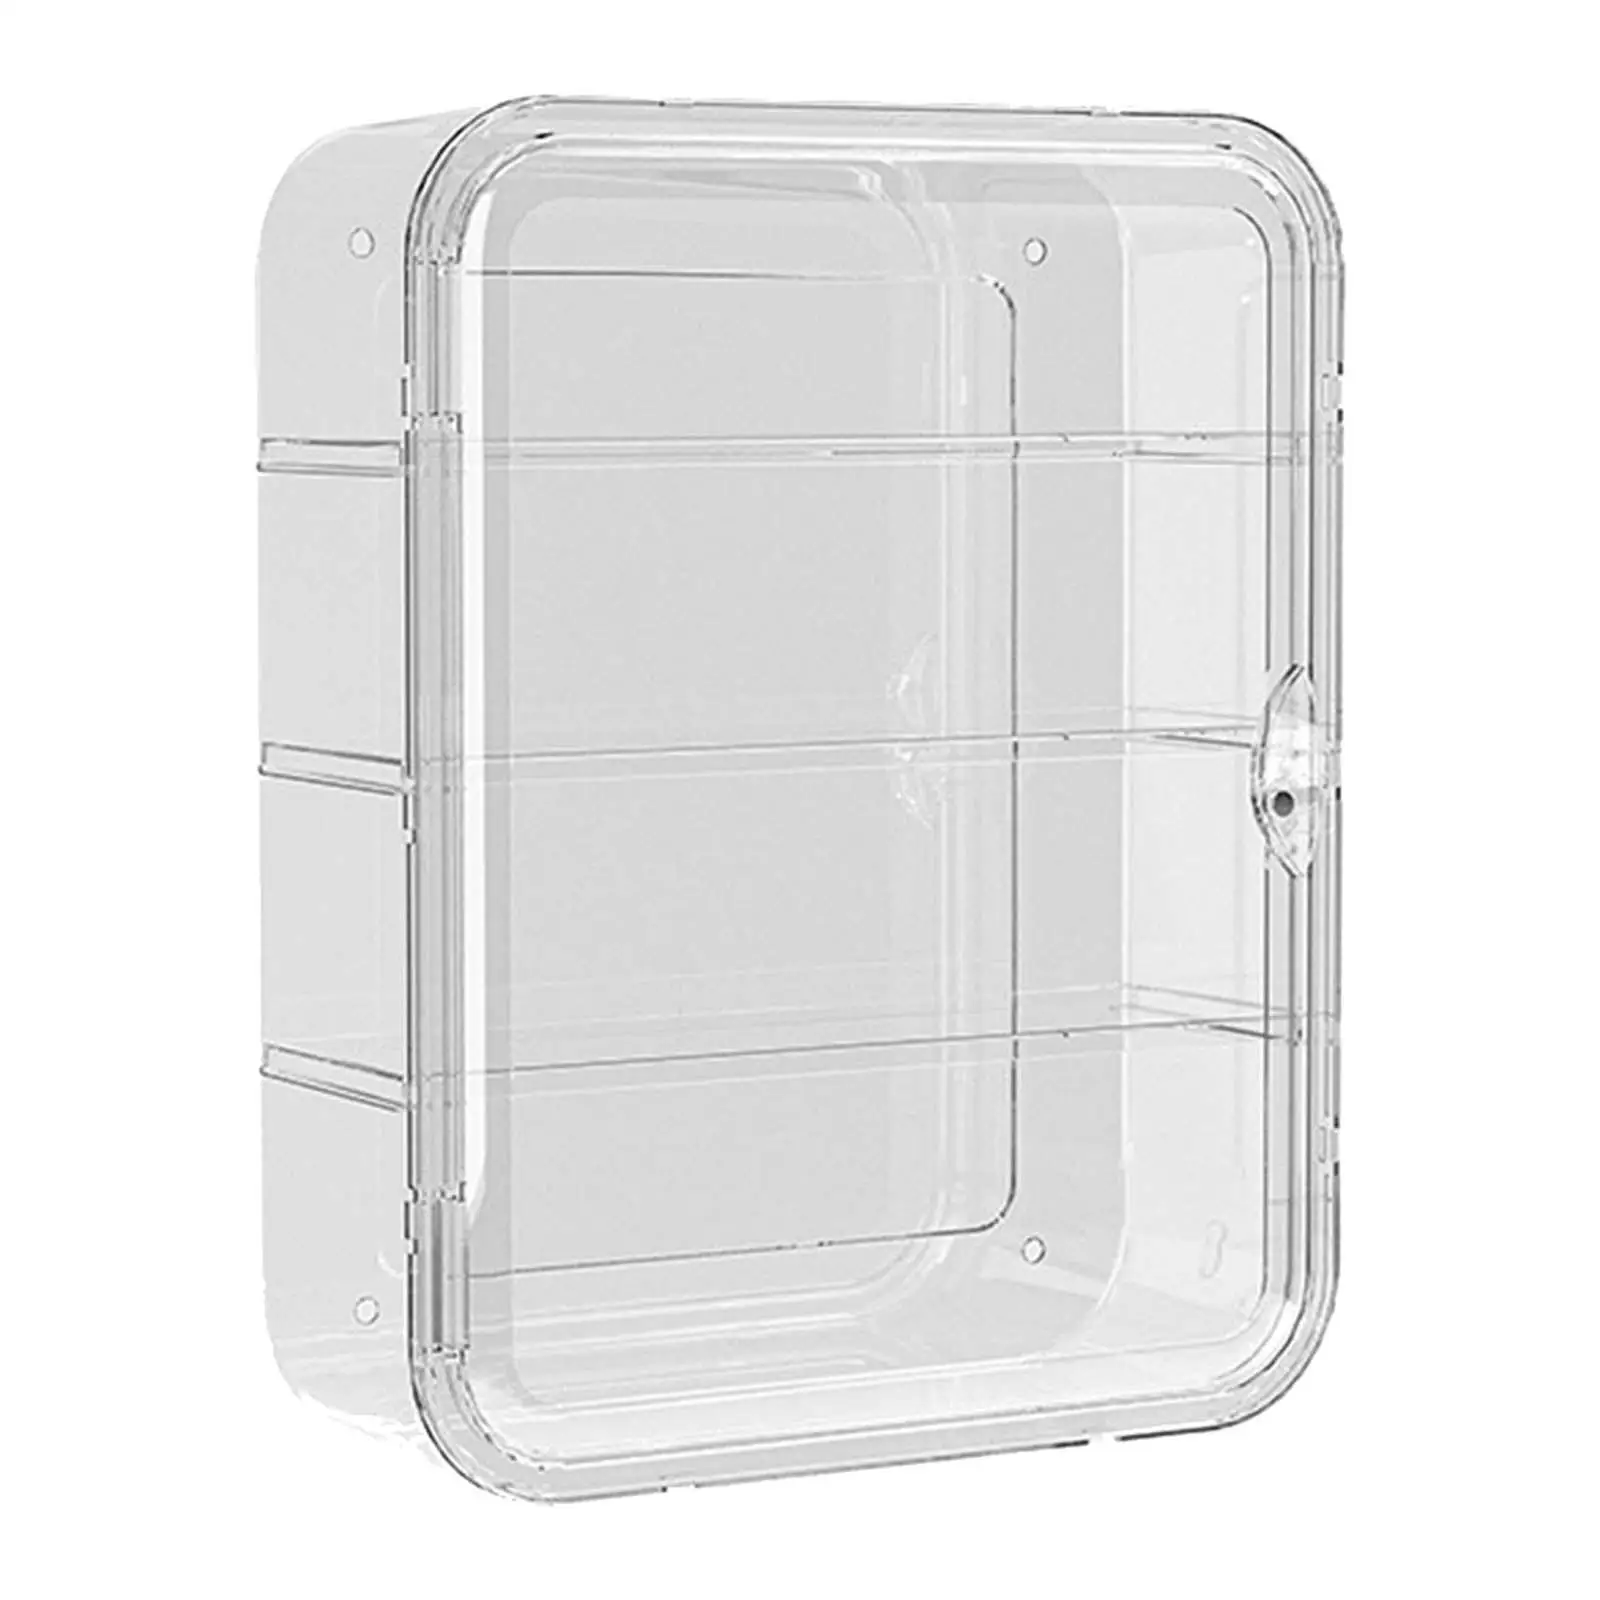 Clear Figurine Display Box for Small Figures Toys Collections Action Figures